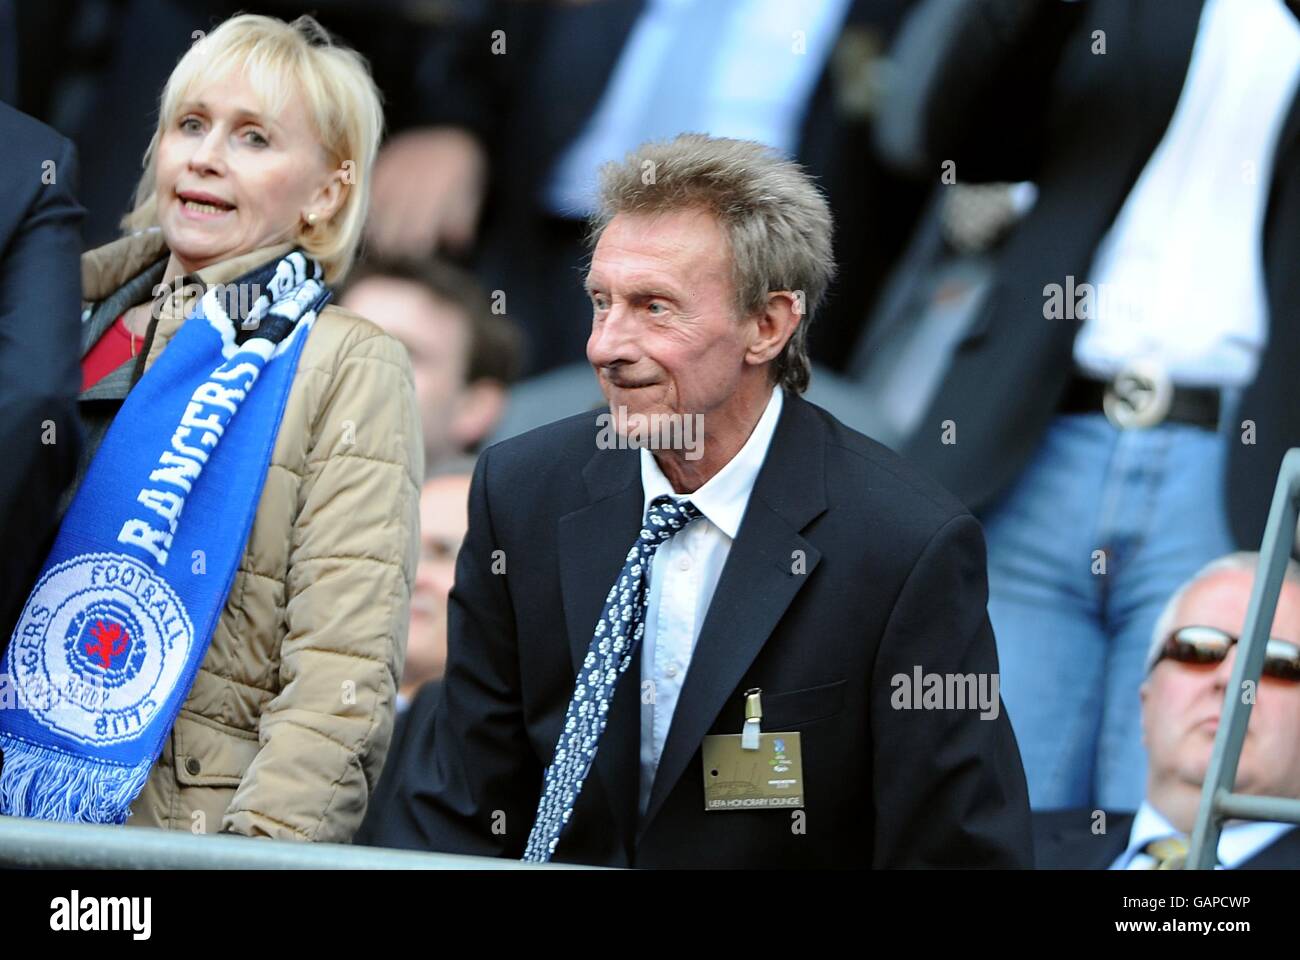 Soccer - UEFA Cup - Final - FC Zenit Saint Petersburg v Rangers - City Of Manchester Stadium. Former Scottish football player Denis Law, in the stands prior to kick-off. Stock Photo